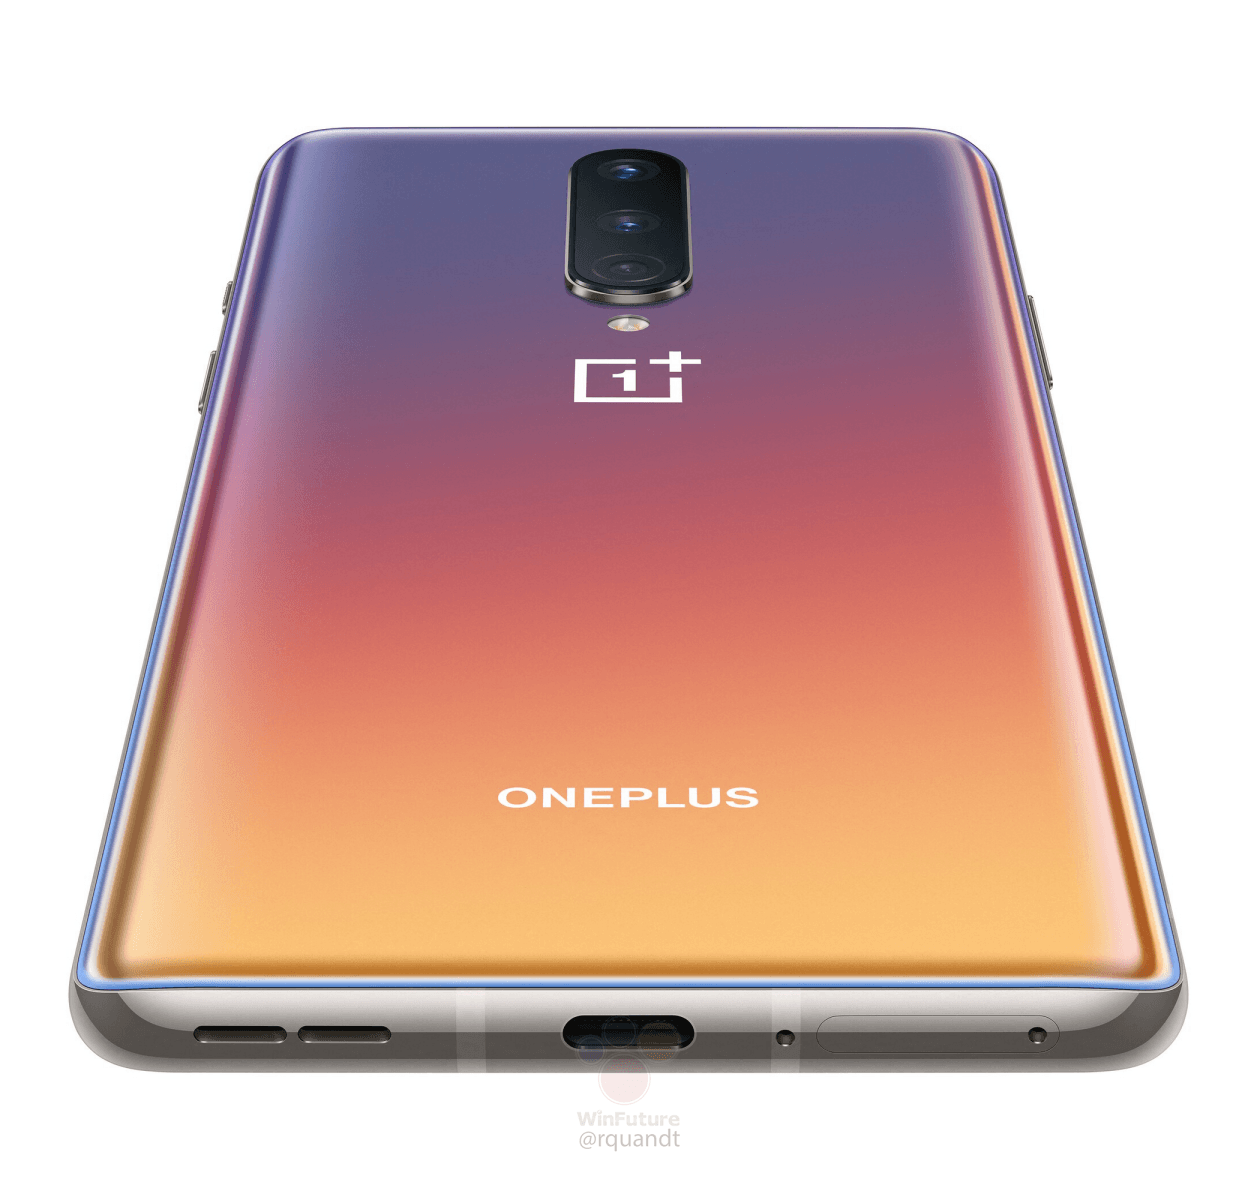 Oneplus 8 And Oneplus 8 Pro Pricing And Specifications Appear Before Launch Gizmochina